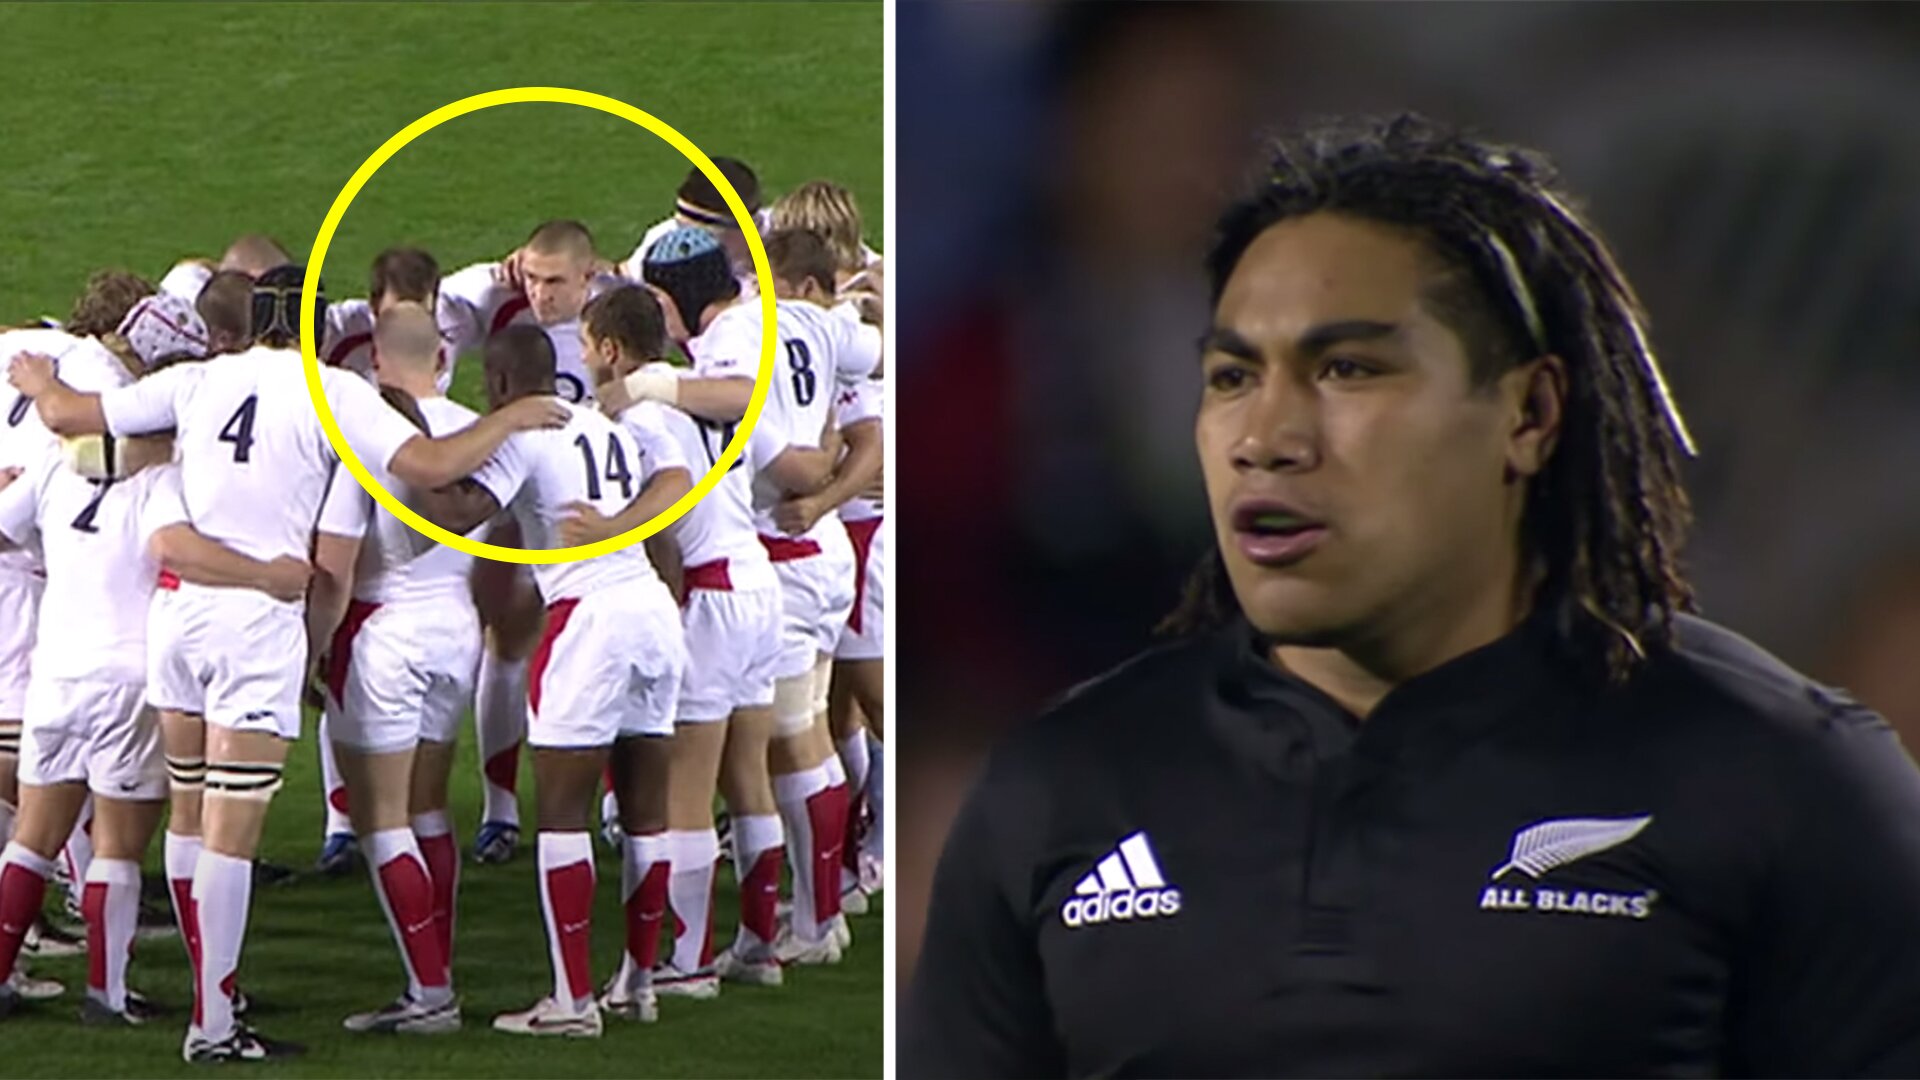 All Blacks social media team go full savage as they post full match obliteration of woeful 2008 England rugby team